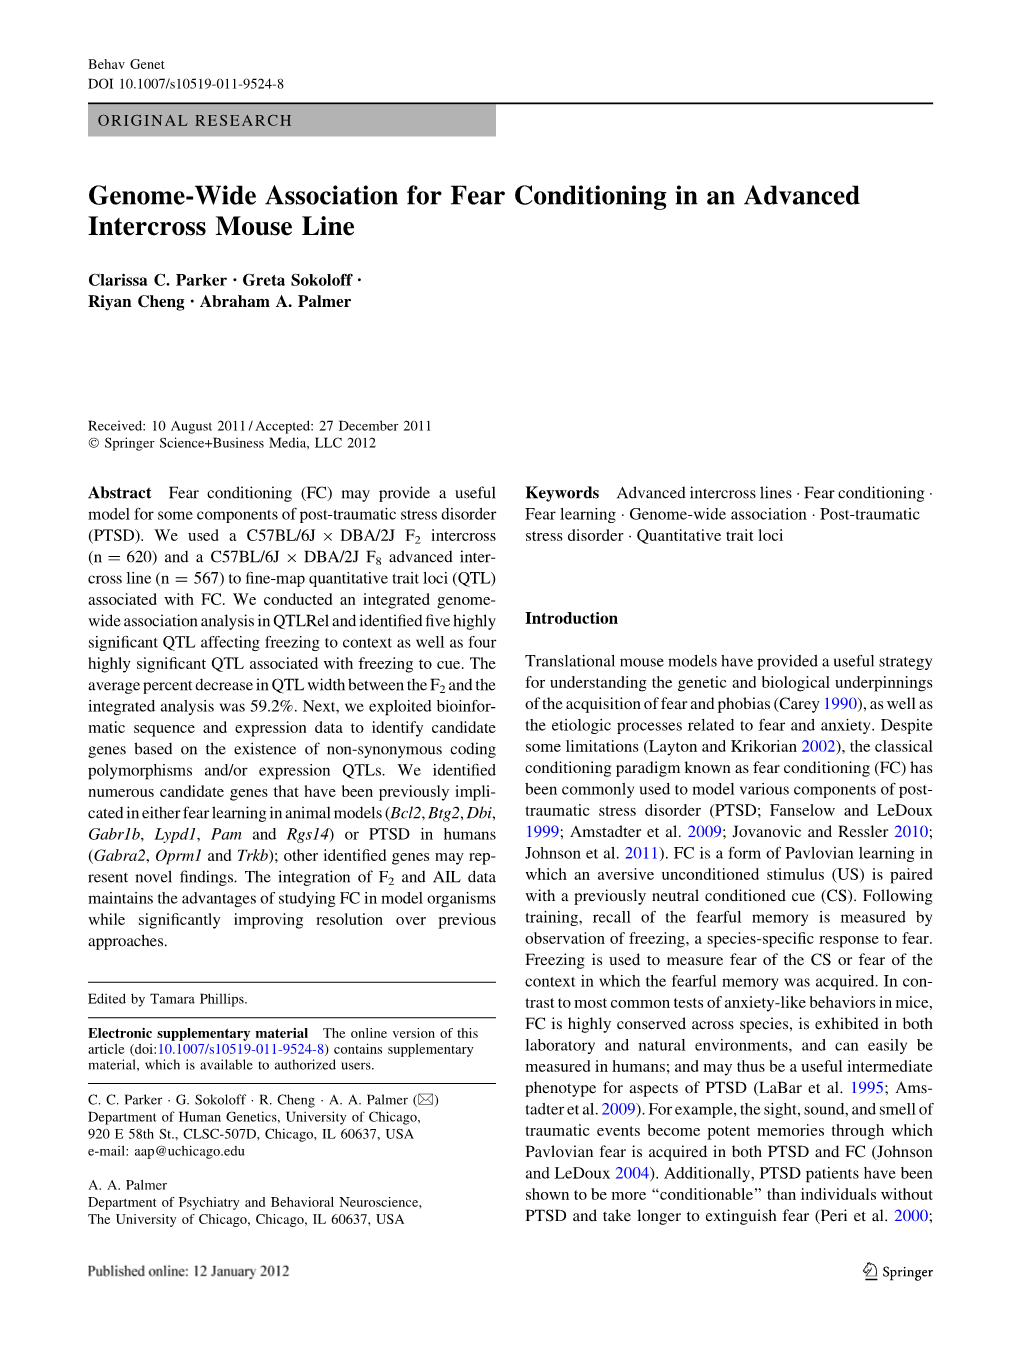 Genome-Wide Association for Fear Conditioning in an Advanced Intercross Mouse Line